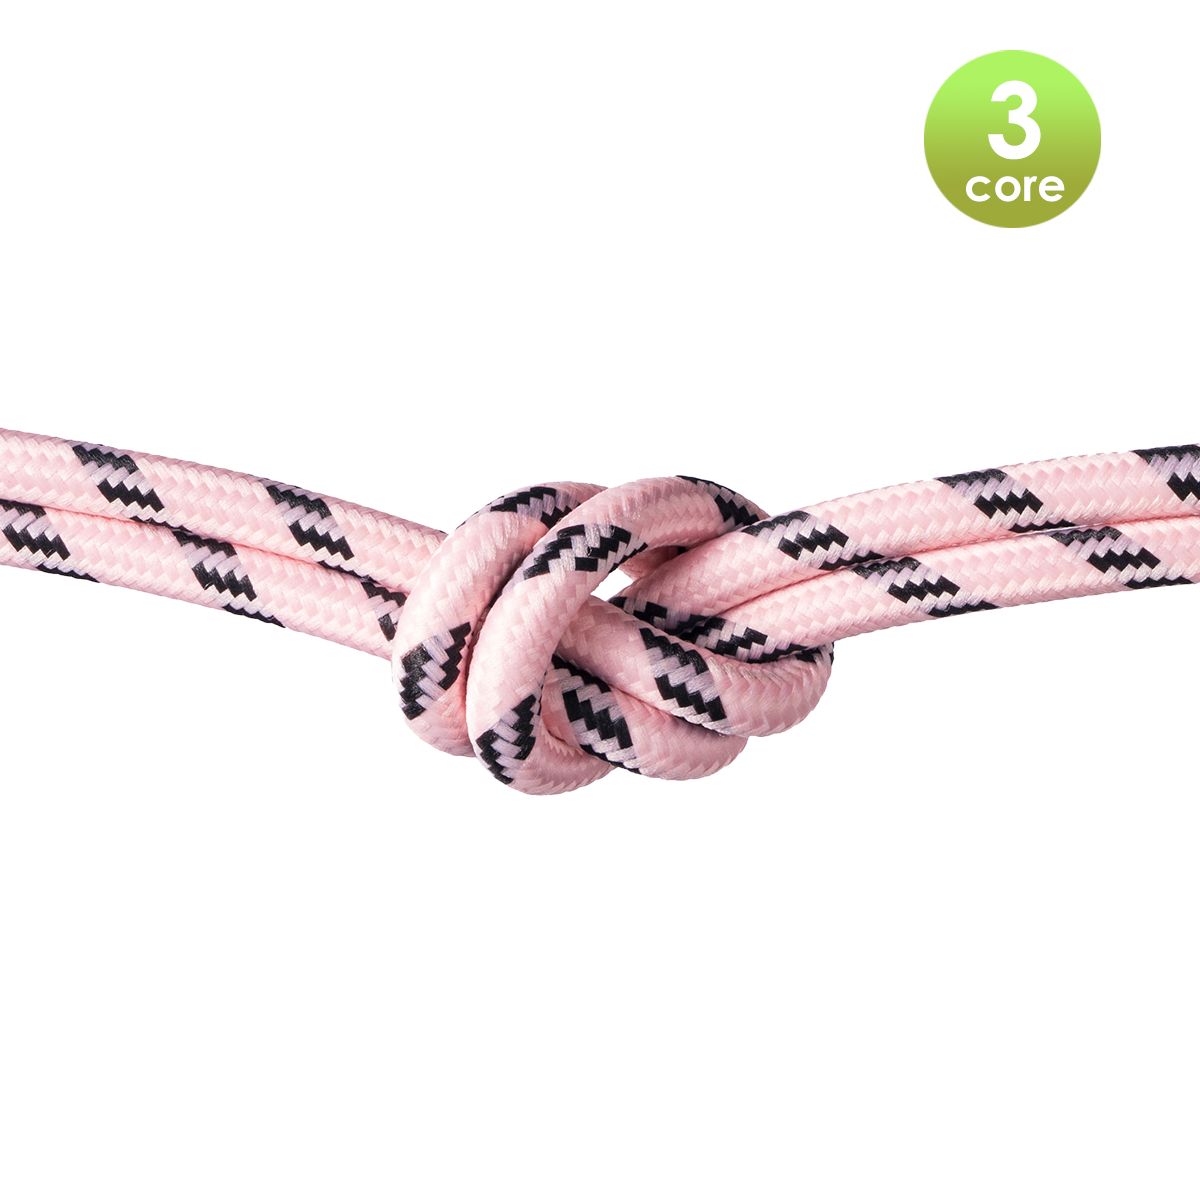 Tangla lighting - TLCB03002C - 3c - Fabric cable 3 core - in pink and black dot